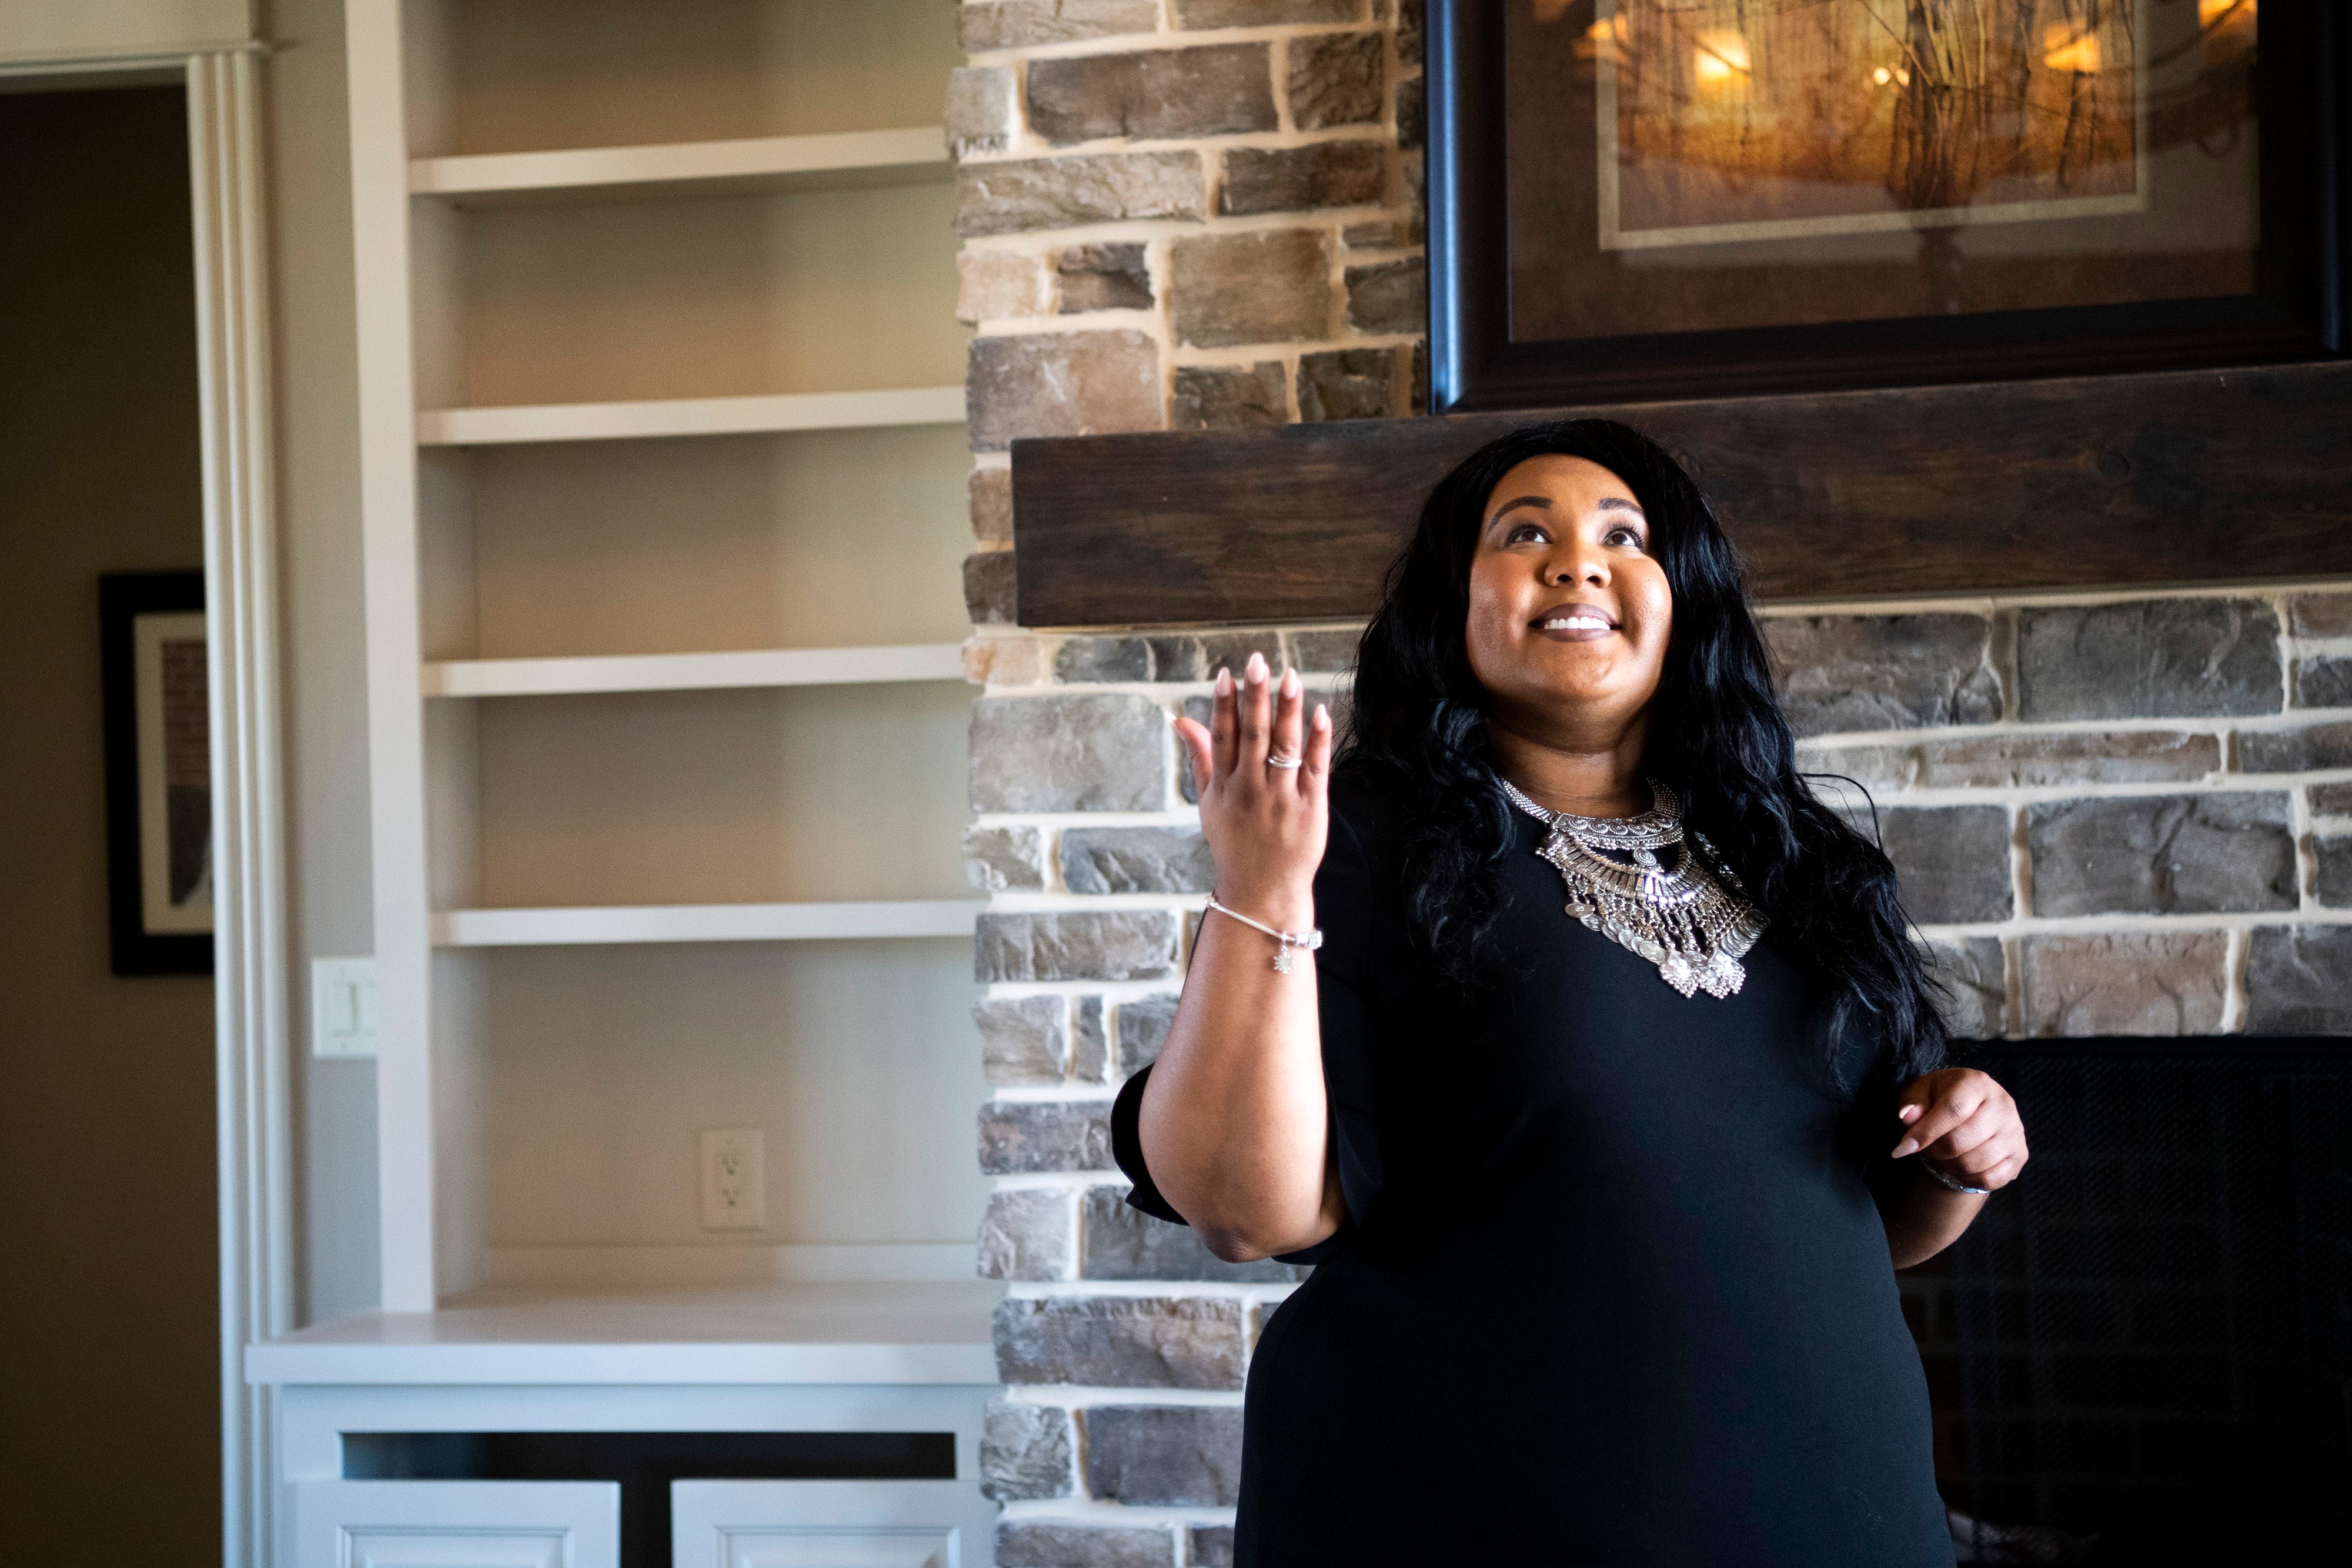 Adrienne Landes points out features in a newly built home in Lenoir City. Adrienne has had to overcome the challenges and stereotypes that come with being a young real estate agent. She said the late nights and weekends she works are worth it when she sees her clients happy in their new homes.